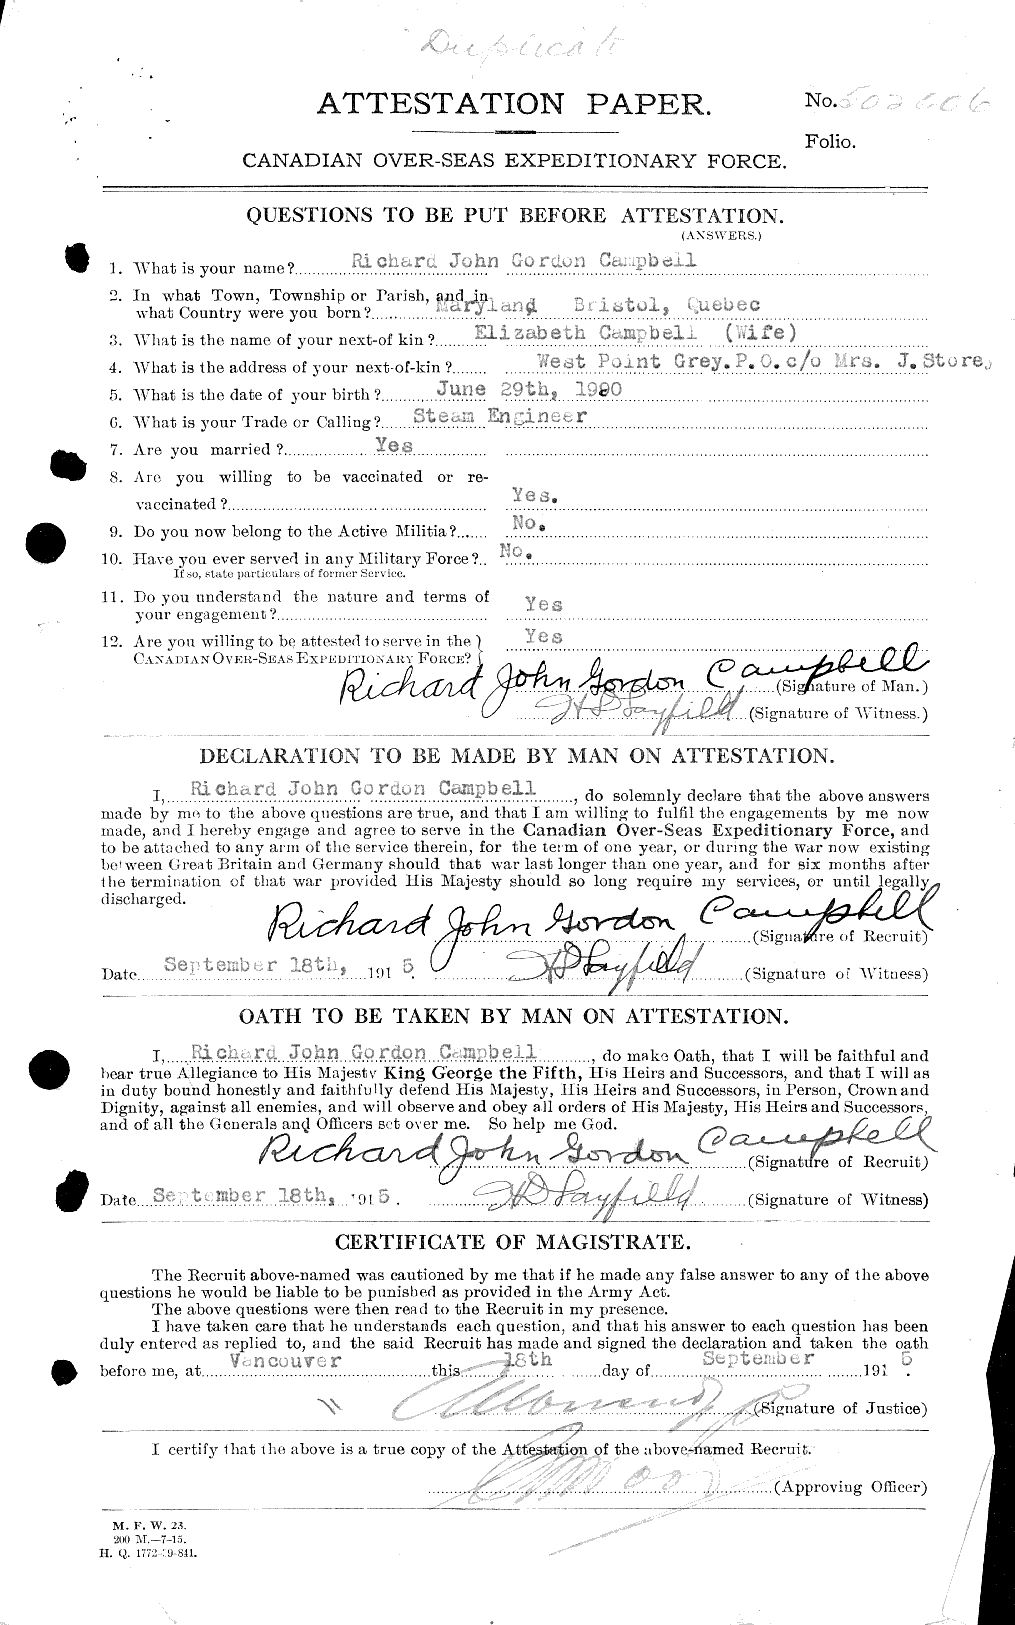 Personnel Records of the First World War - CEF 007055a